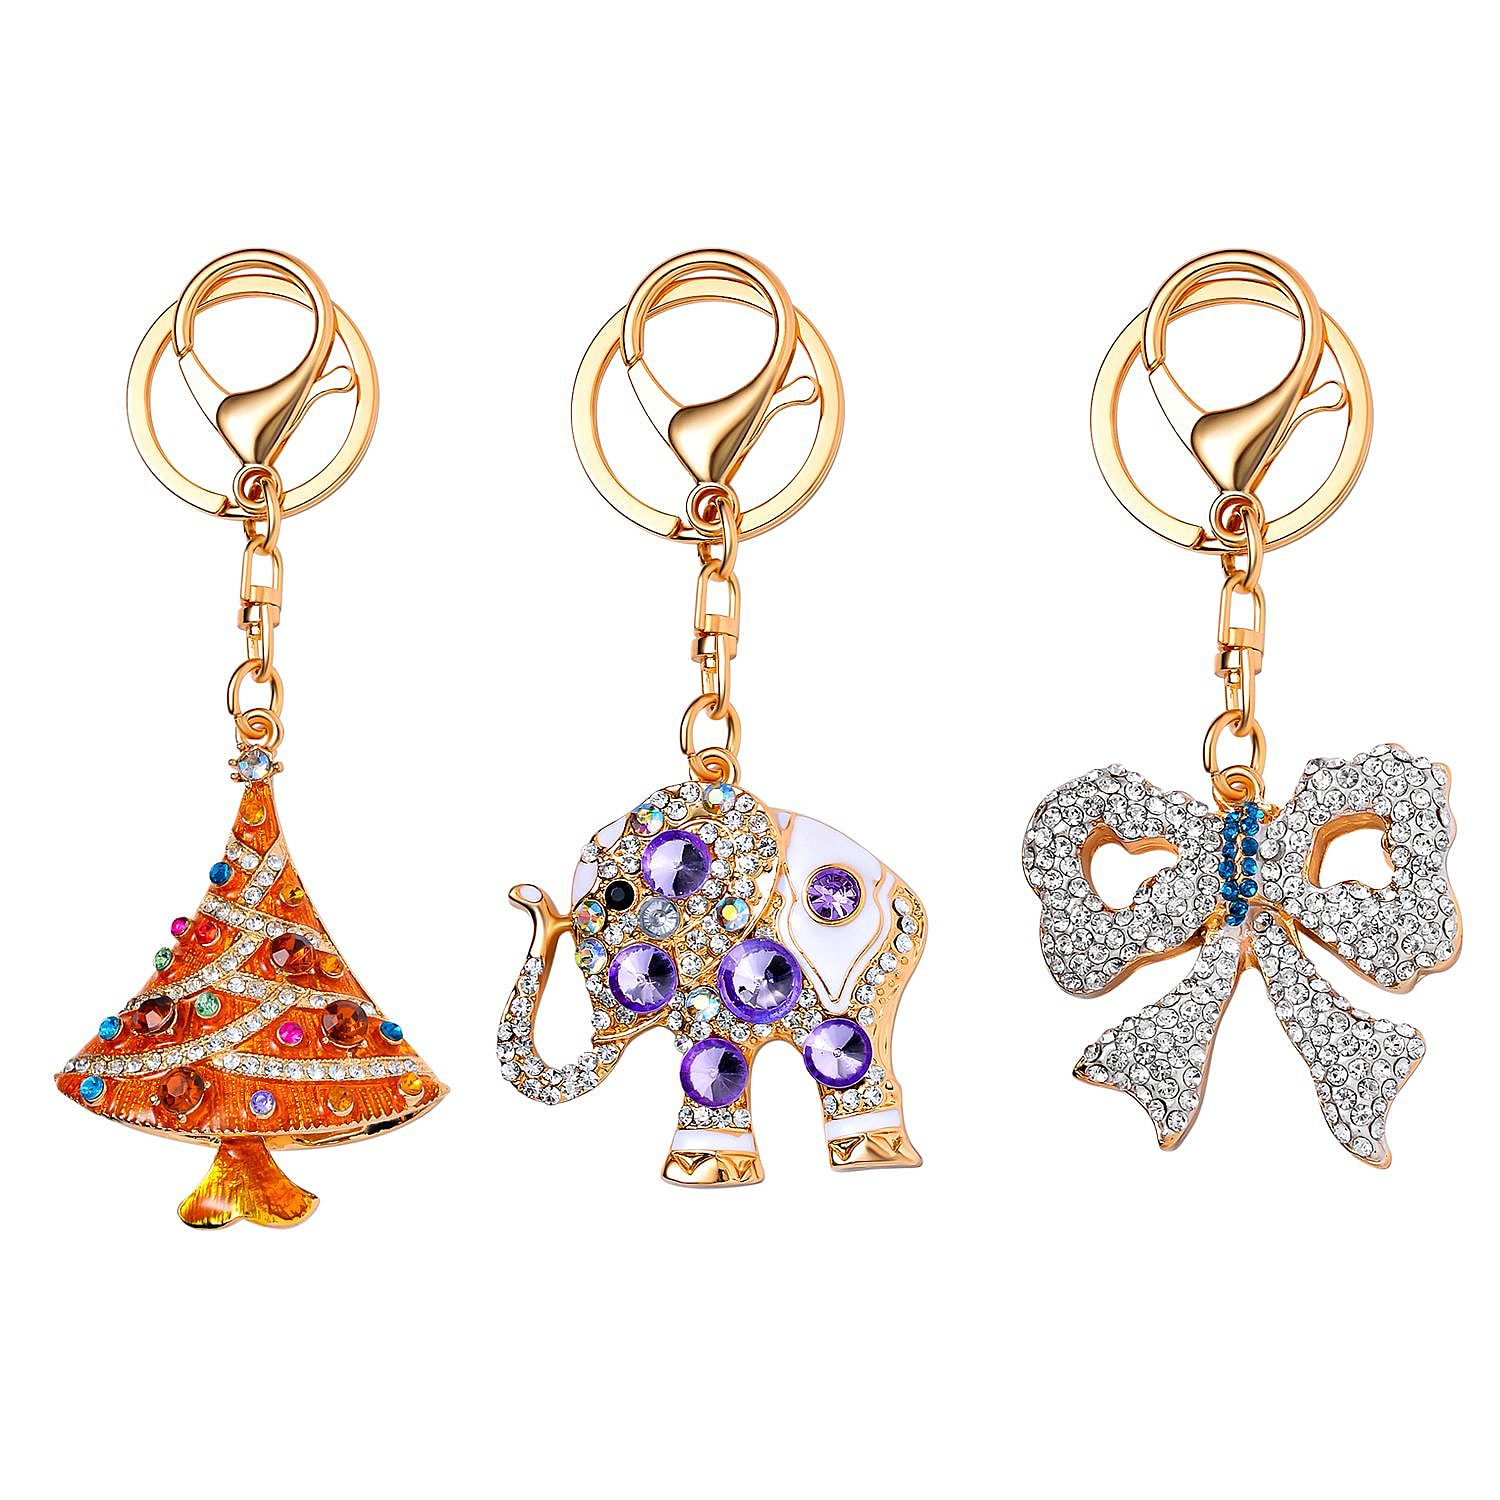 Set of 3 Sparkling Crystal Keychains With Different Designs (Bowknot, Christmas Tree, and Elephant) - Multi